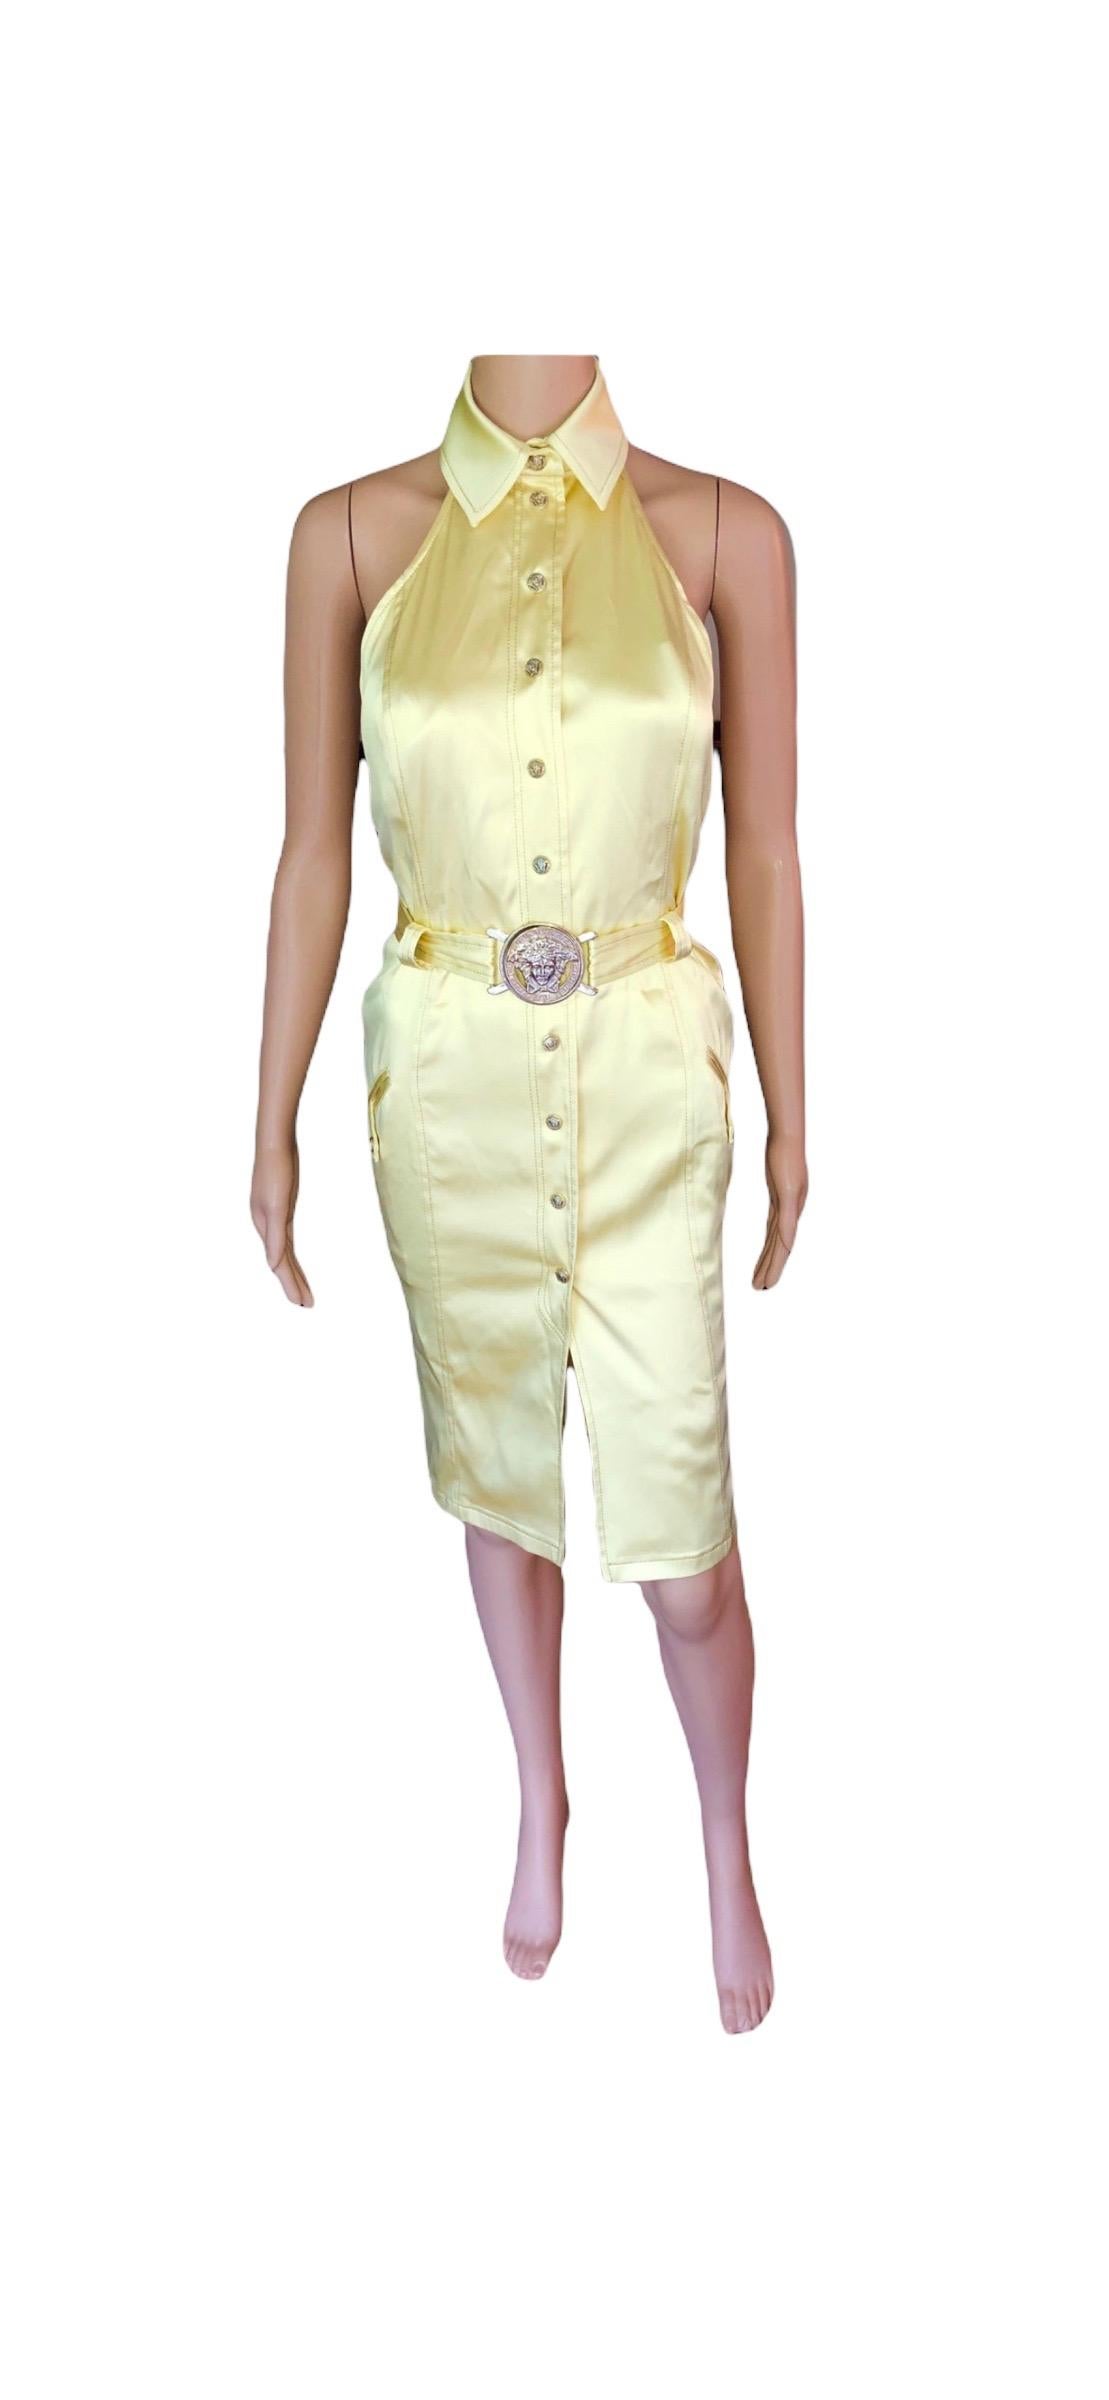 Versace S/S 2005 Runway Logo Belted Cutout Back Dress For Sale 5